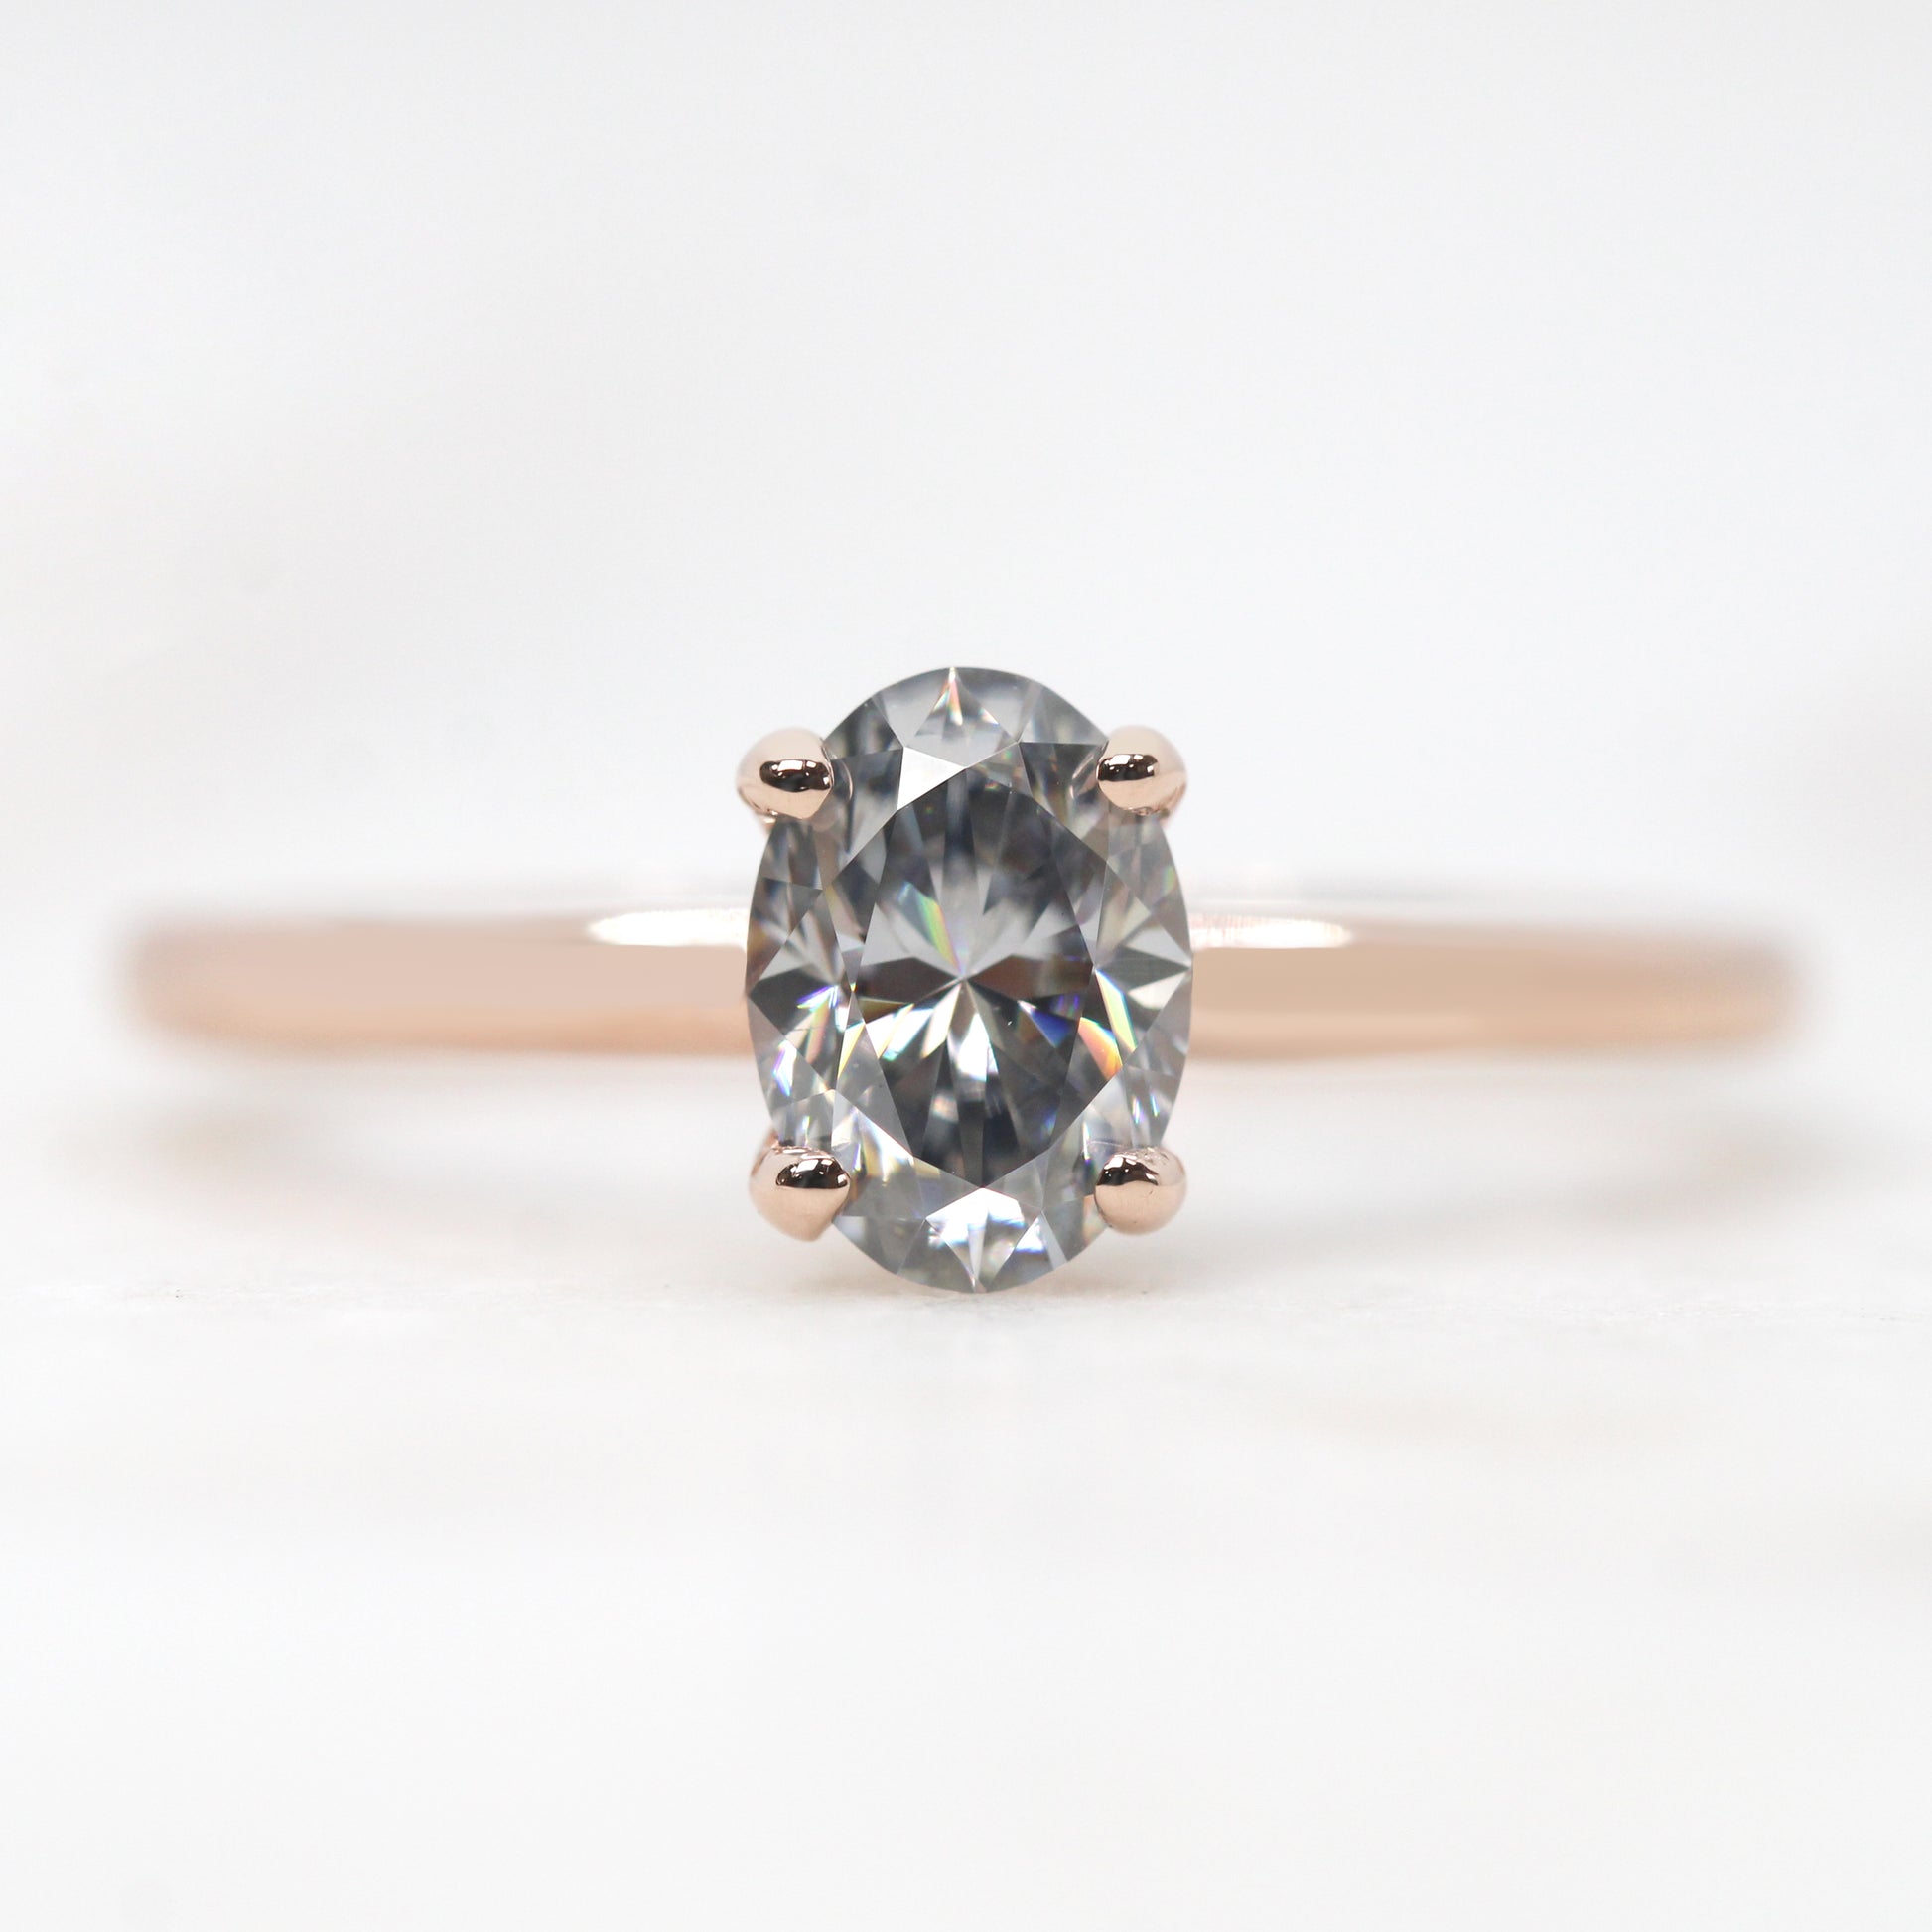 Emma Ring with a 0.8 Carat Oval Gray Moissanite - Made to Order, Choose Your Gold Tone - Midwinter Co. Alternative Bridal Rings and Modern Fine Jewelry